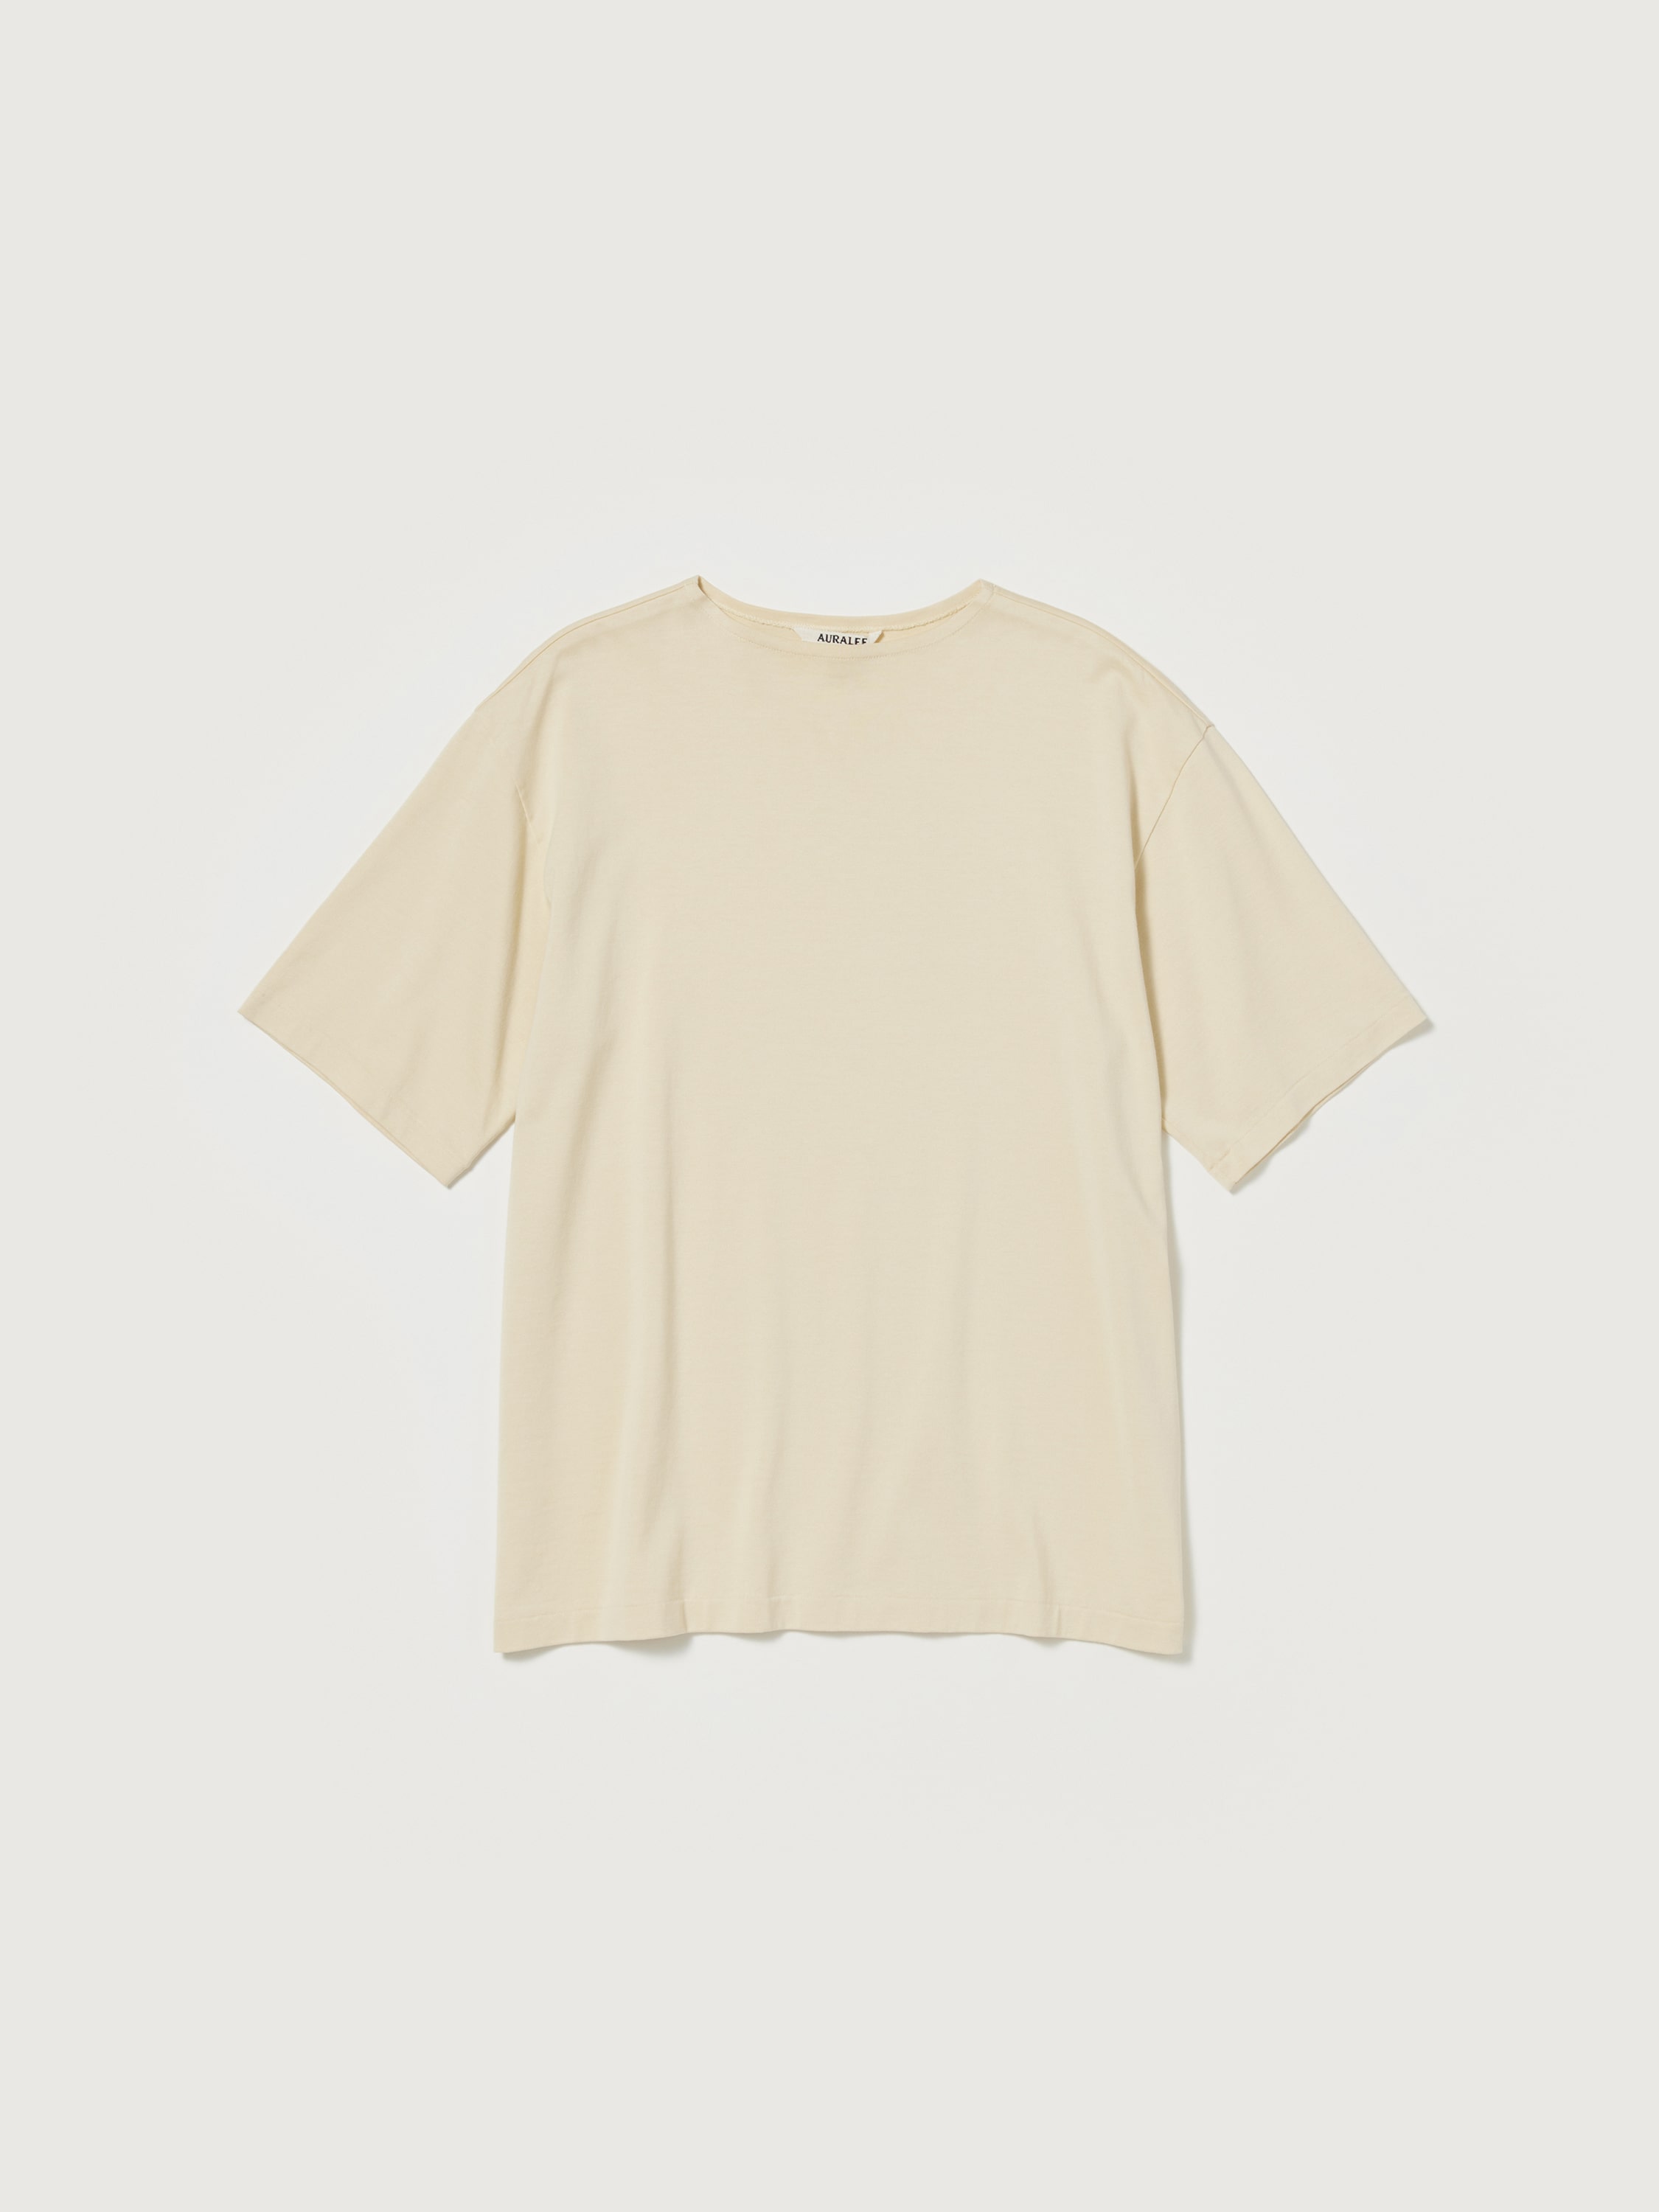 LUSTER PLAITING NARROW BOAT NECK TEE 詳細画像 IVORY 1